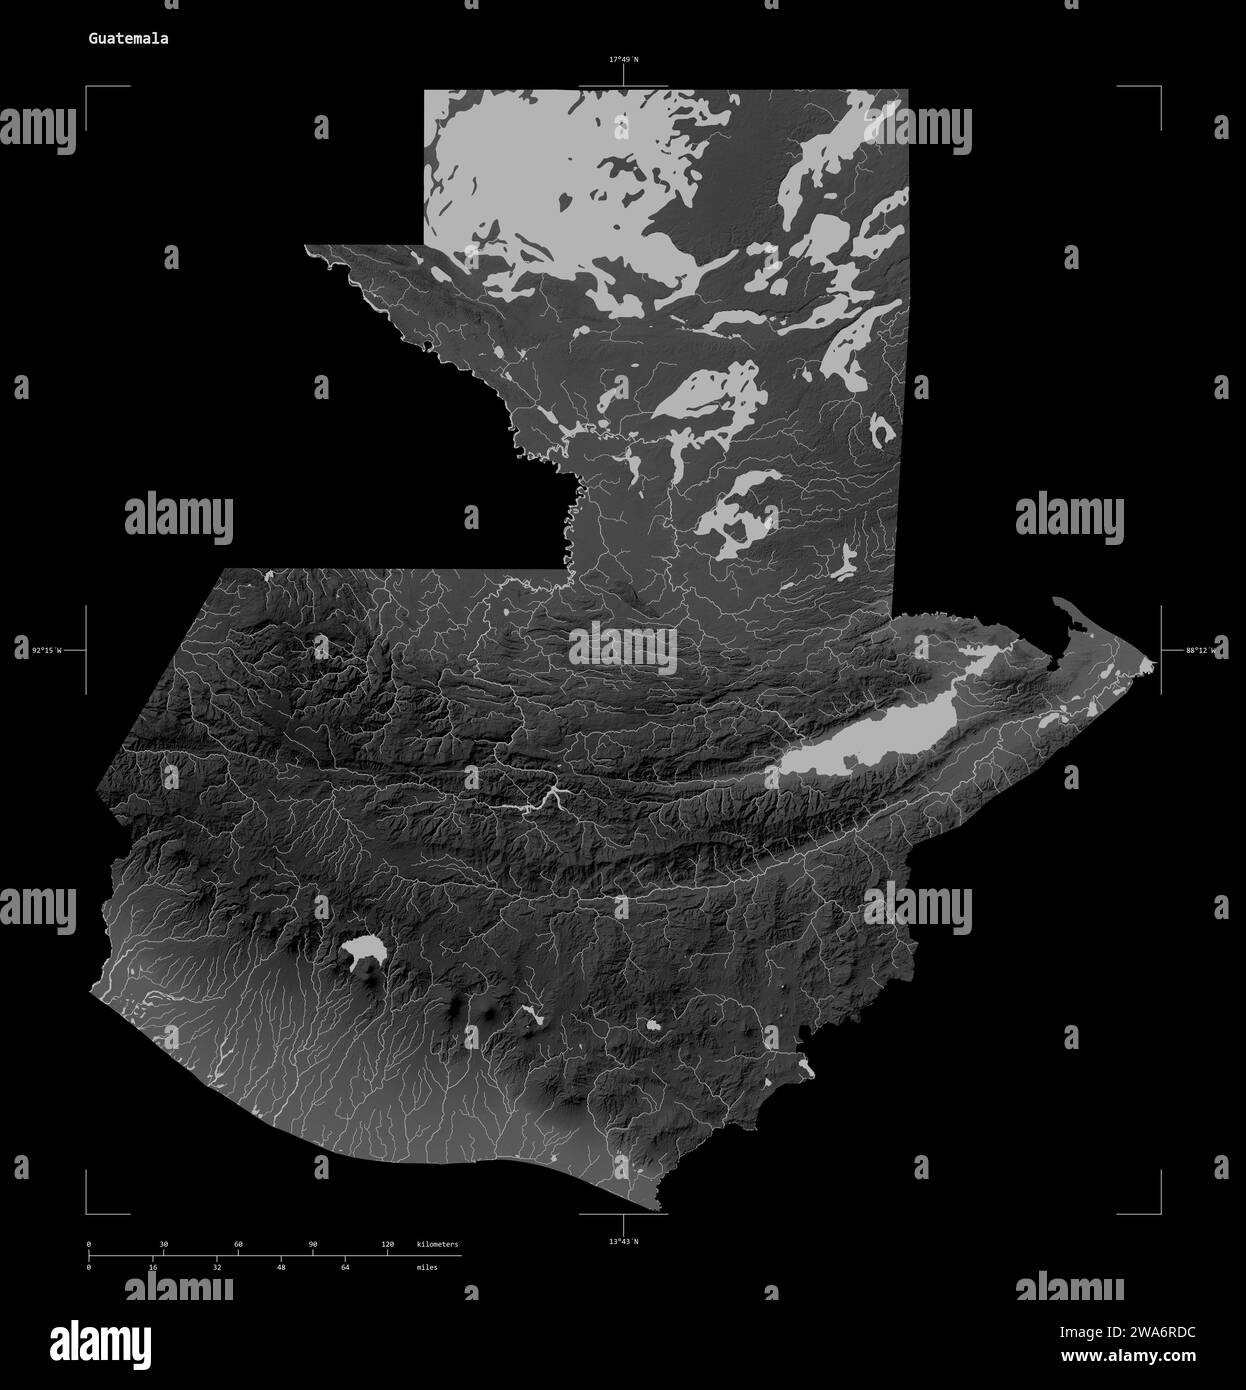 Shape of a Grayscale elevation map with lakes and rivers of the Guatemala, with distance scale and map border coordinates, isolated on black Stock Photo